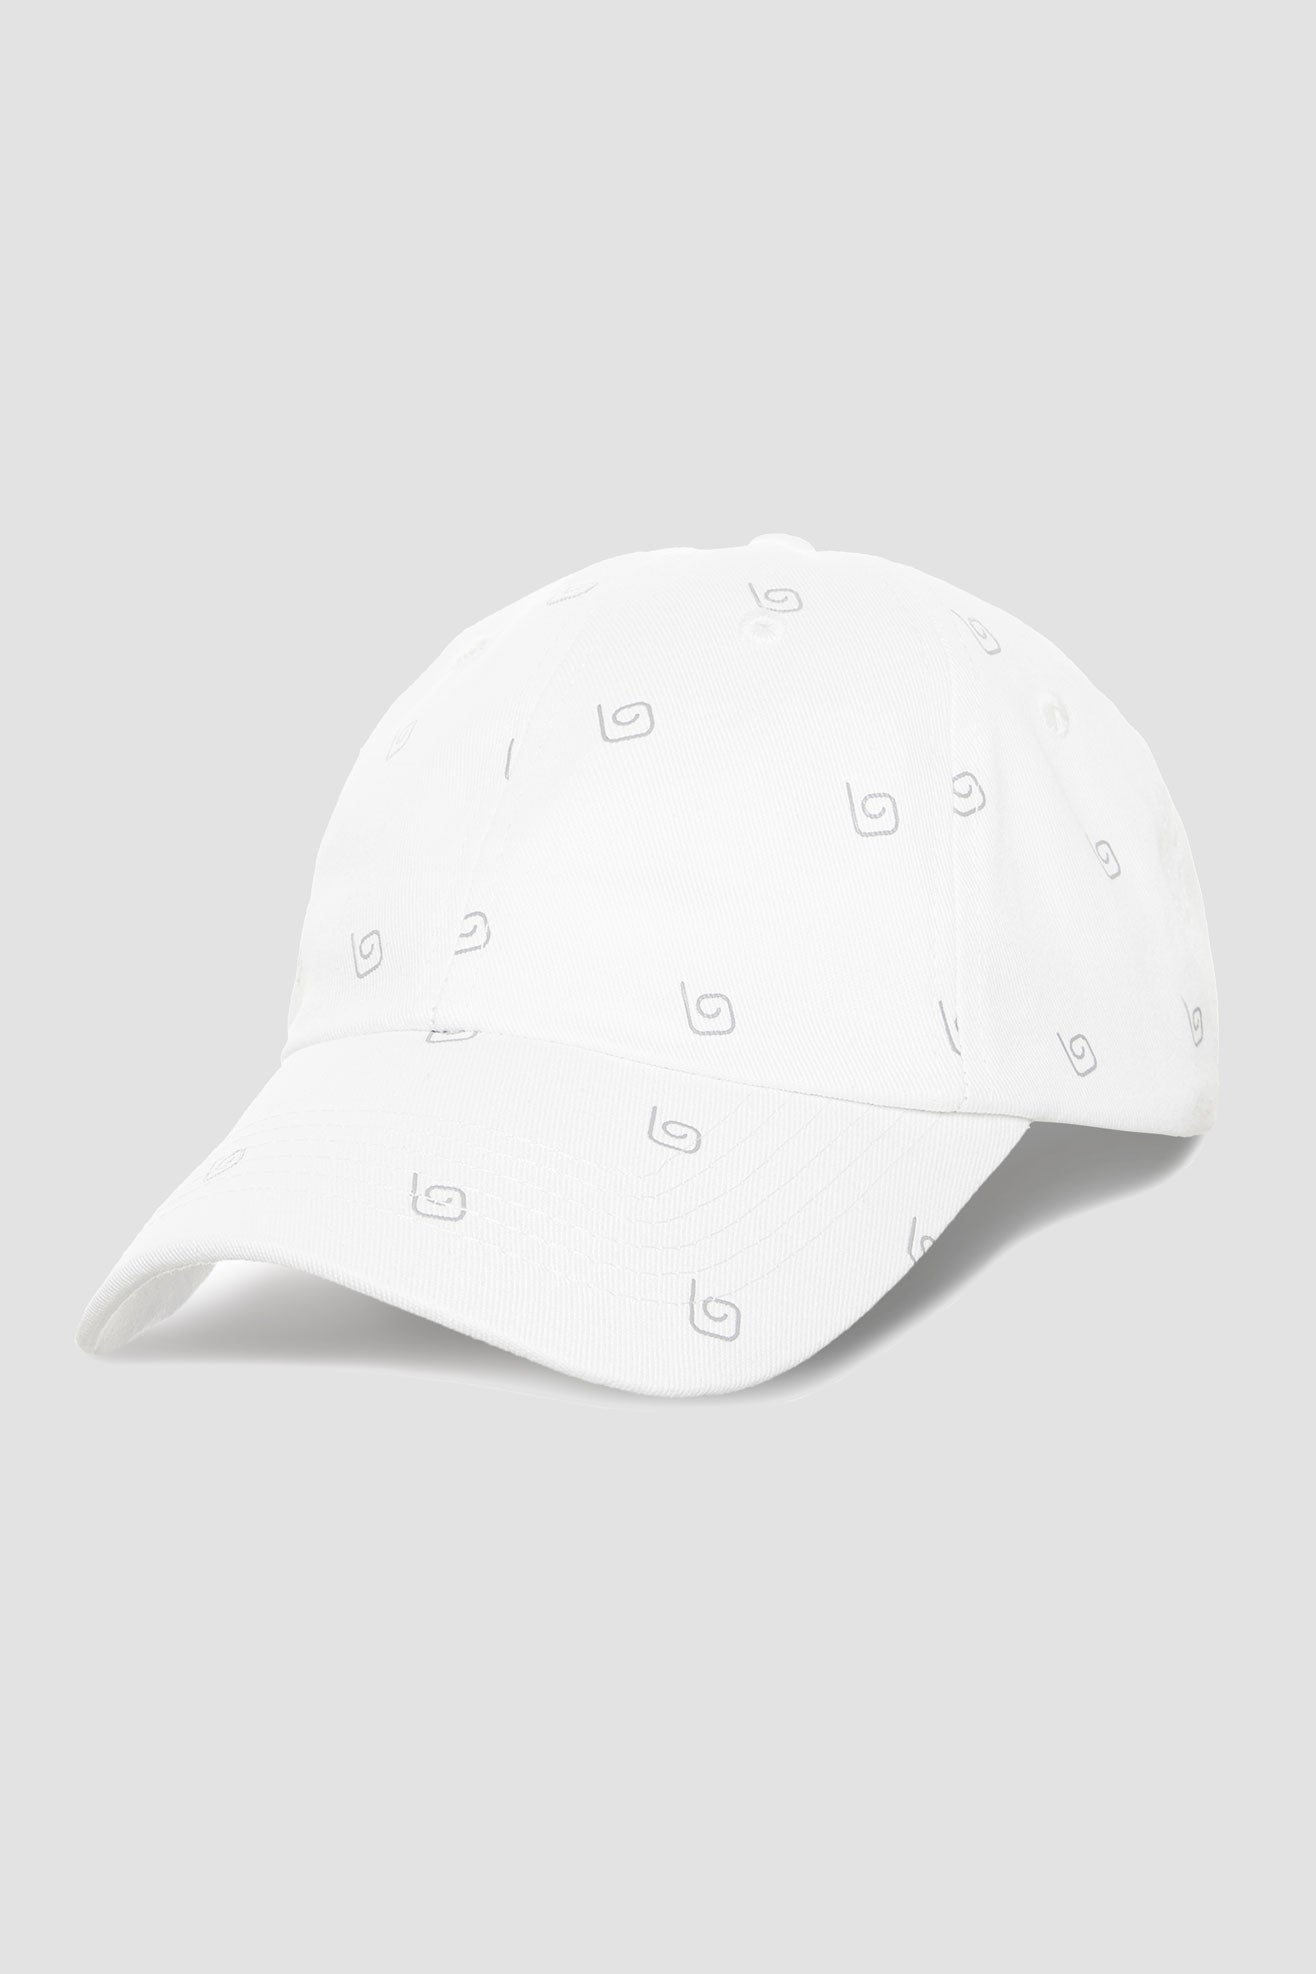 White monogram cap with Olaben logo, perfect headwear accessory for a stylish look.